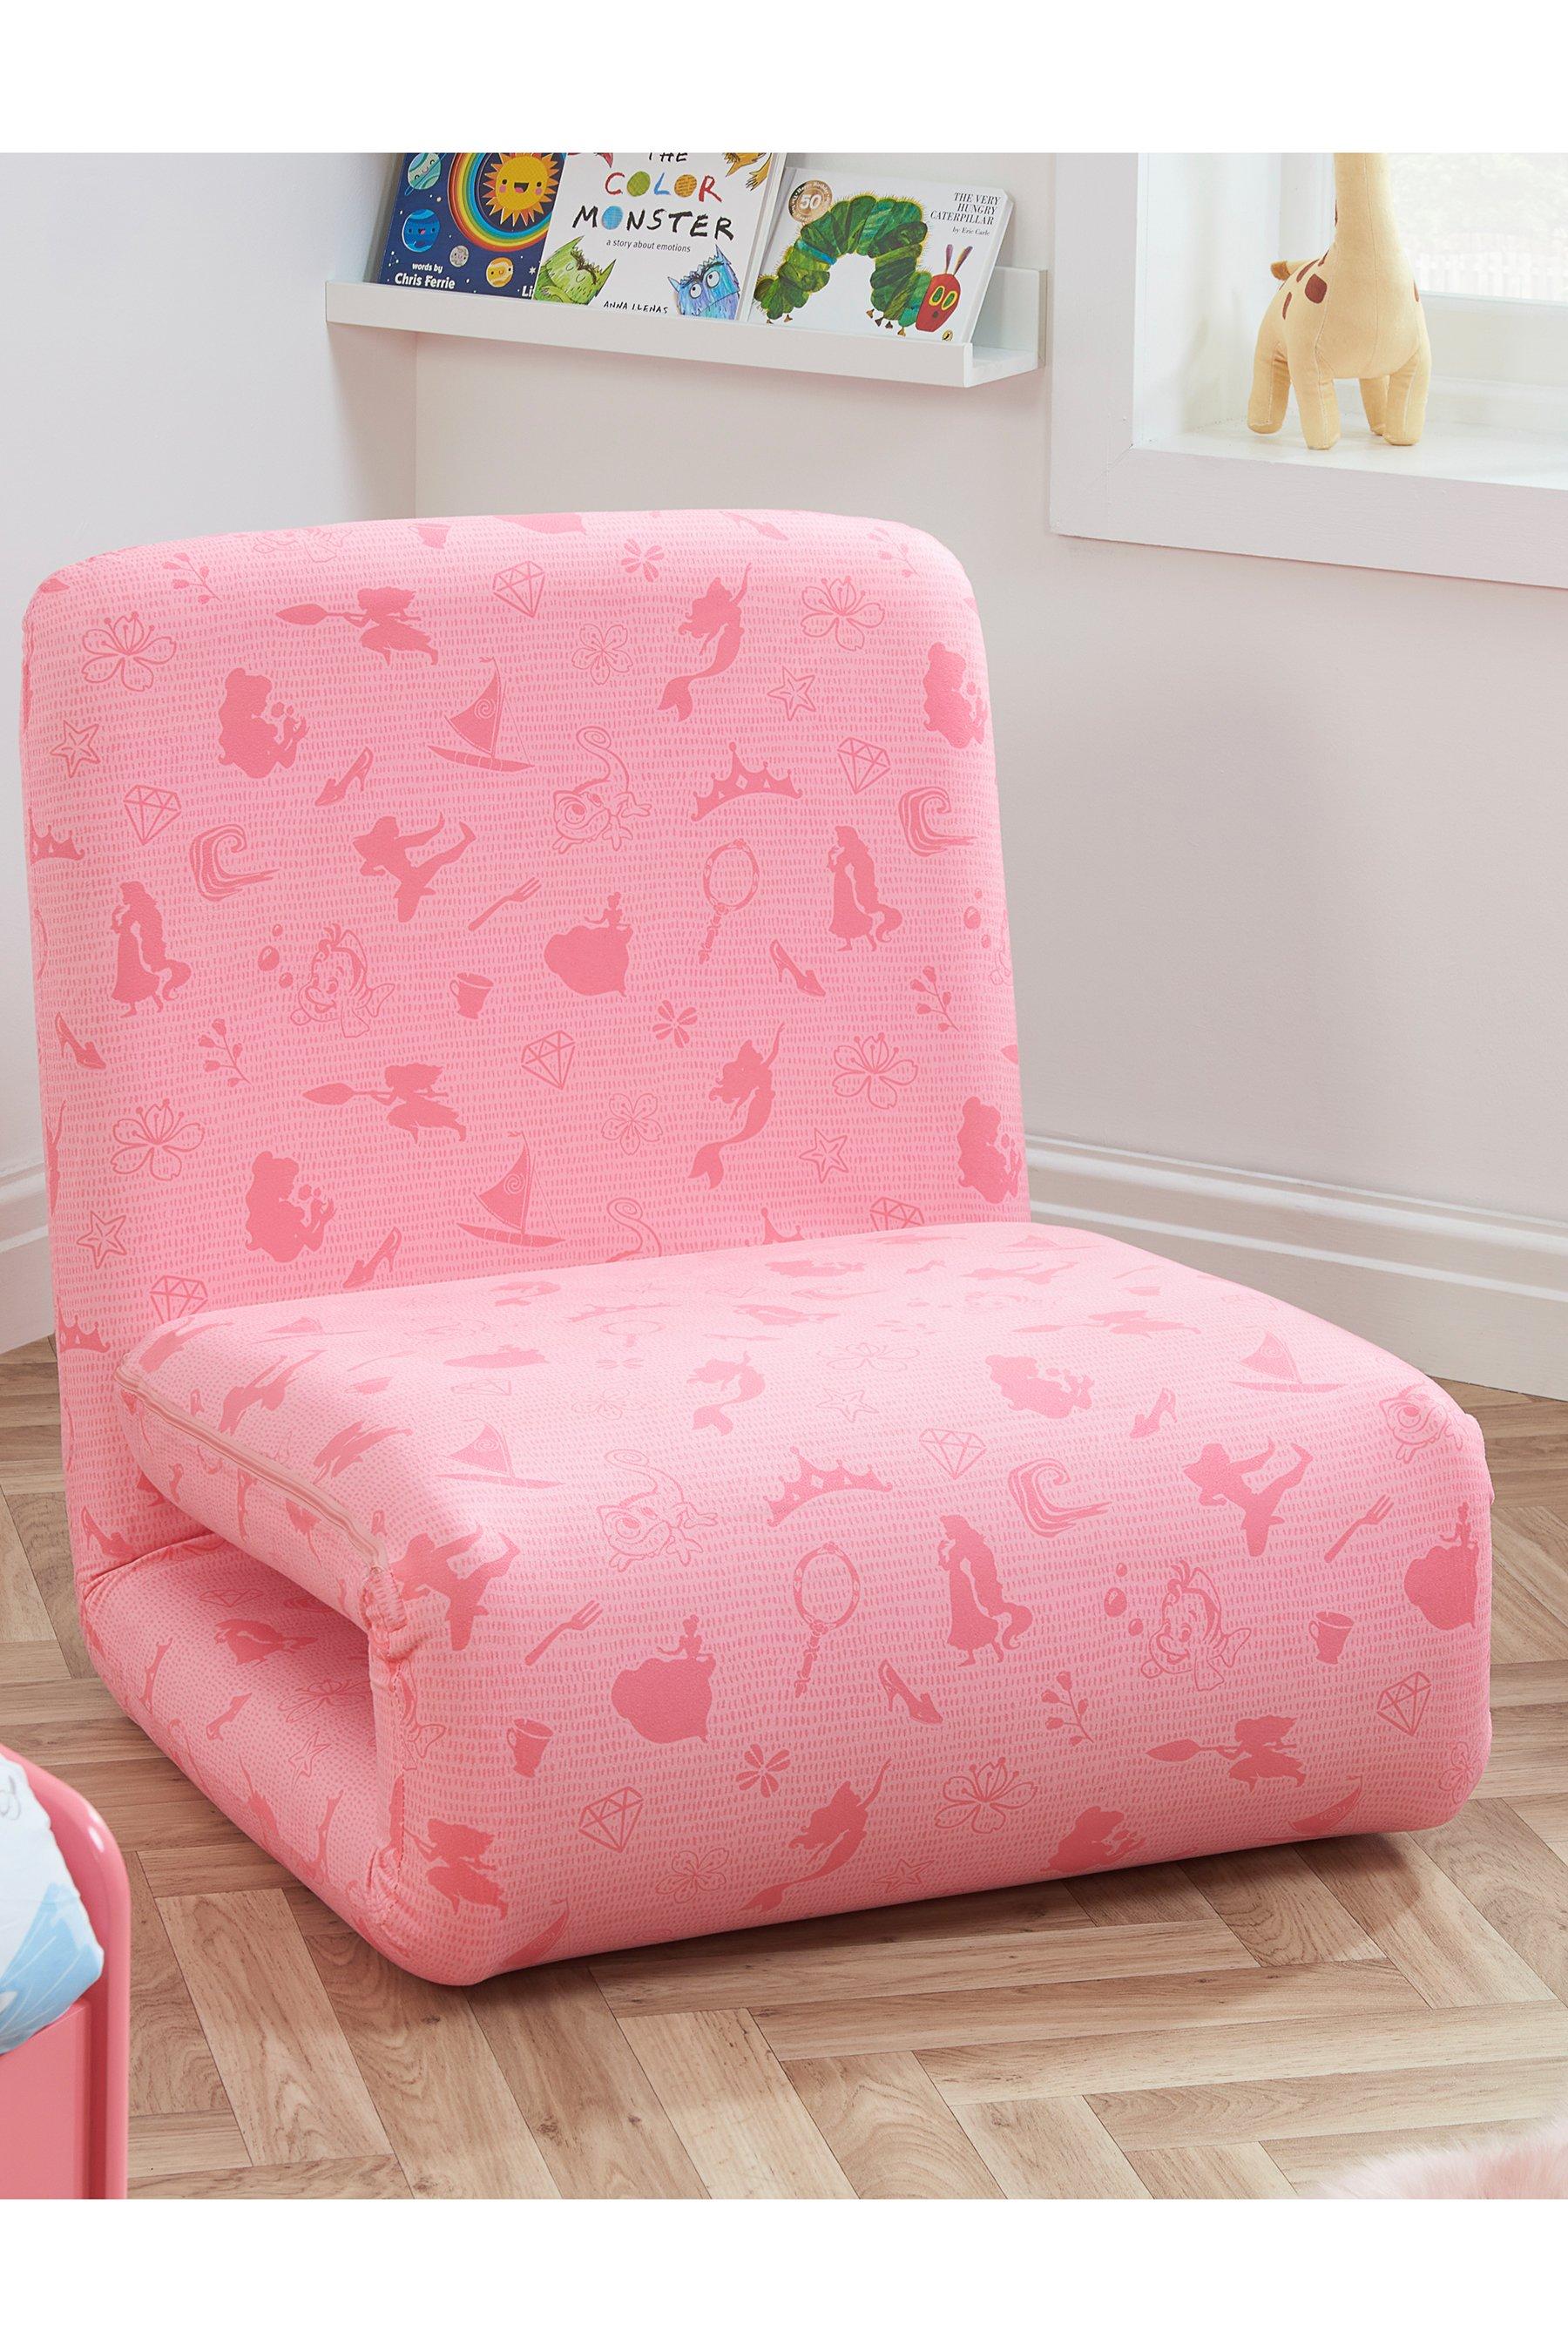 birlea princess fold out bed chair - pink